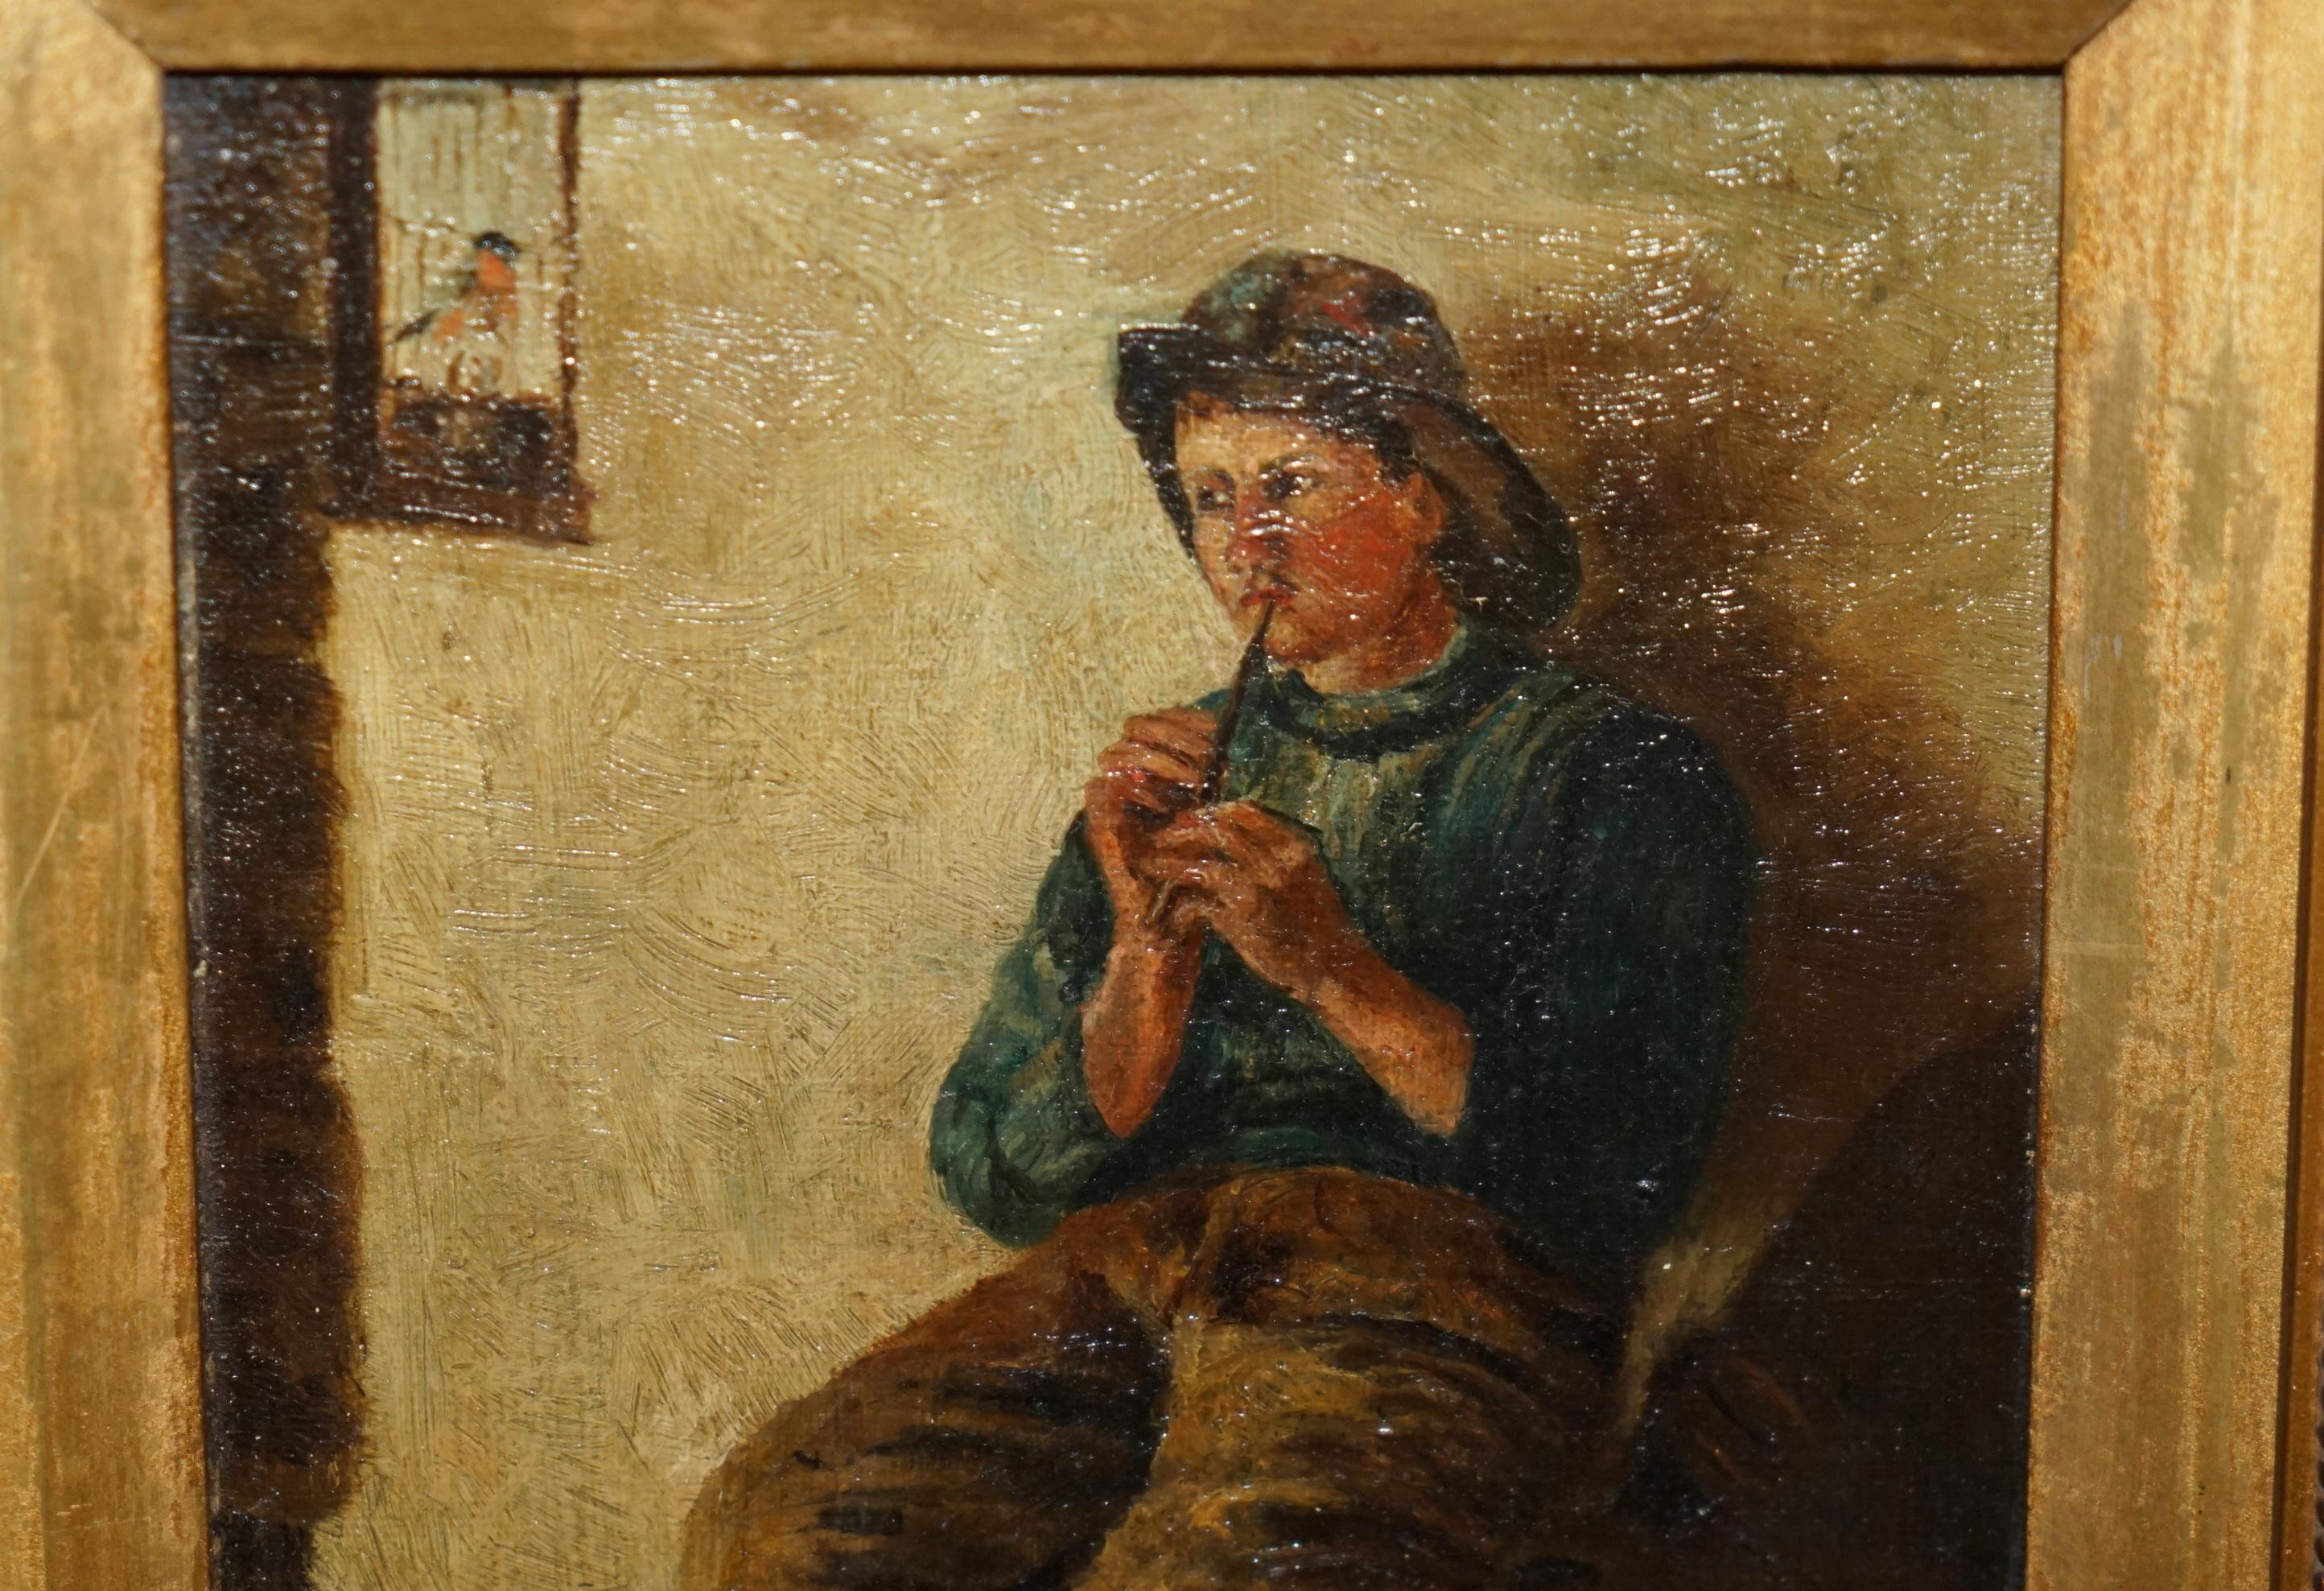 SUBLIME ANTIQUE ViCTORIAN OIL PAINTING OF A YOUNG BOY (FISHERMAN) PLAYING A PIPE (Handbemalt) im Angebot